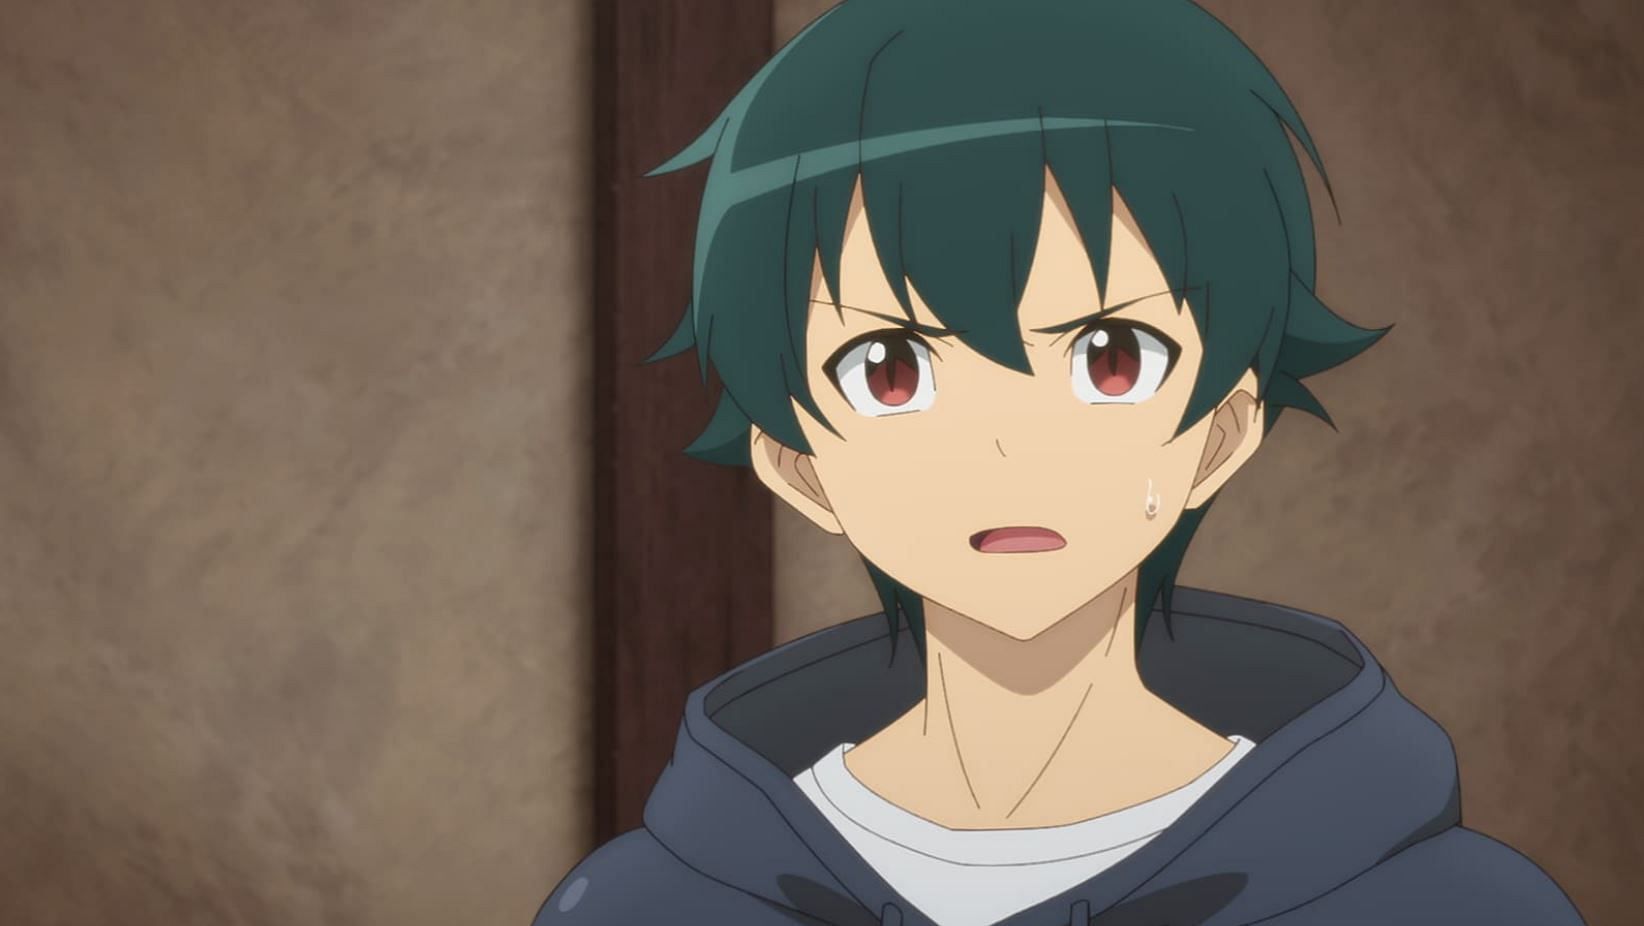 The Devil Is a Part-Timer! Season 3 - episodes streaming online